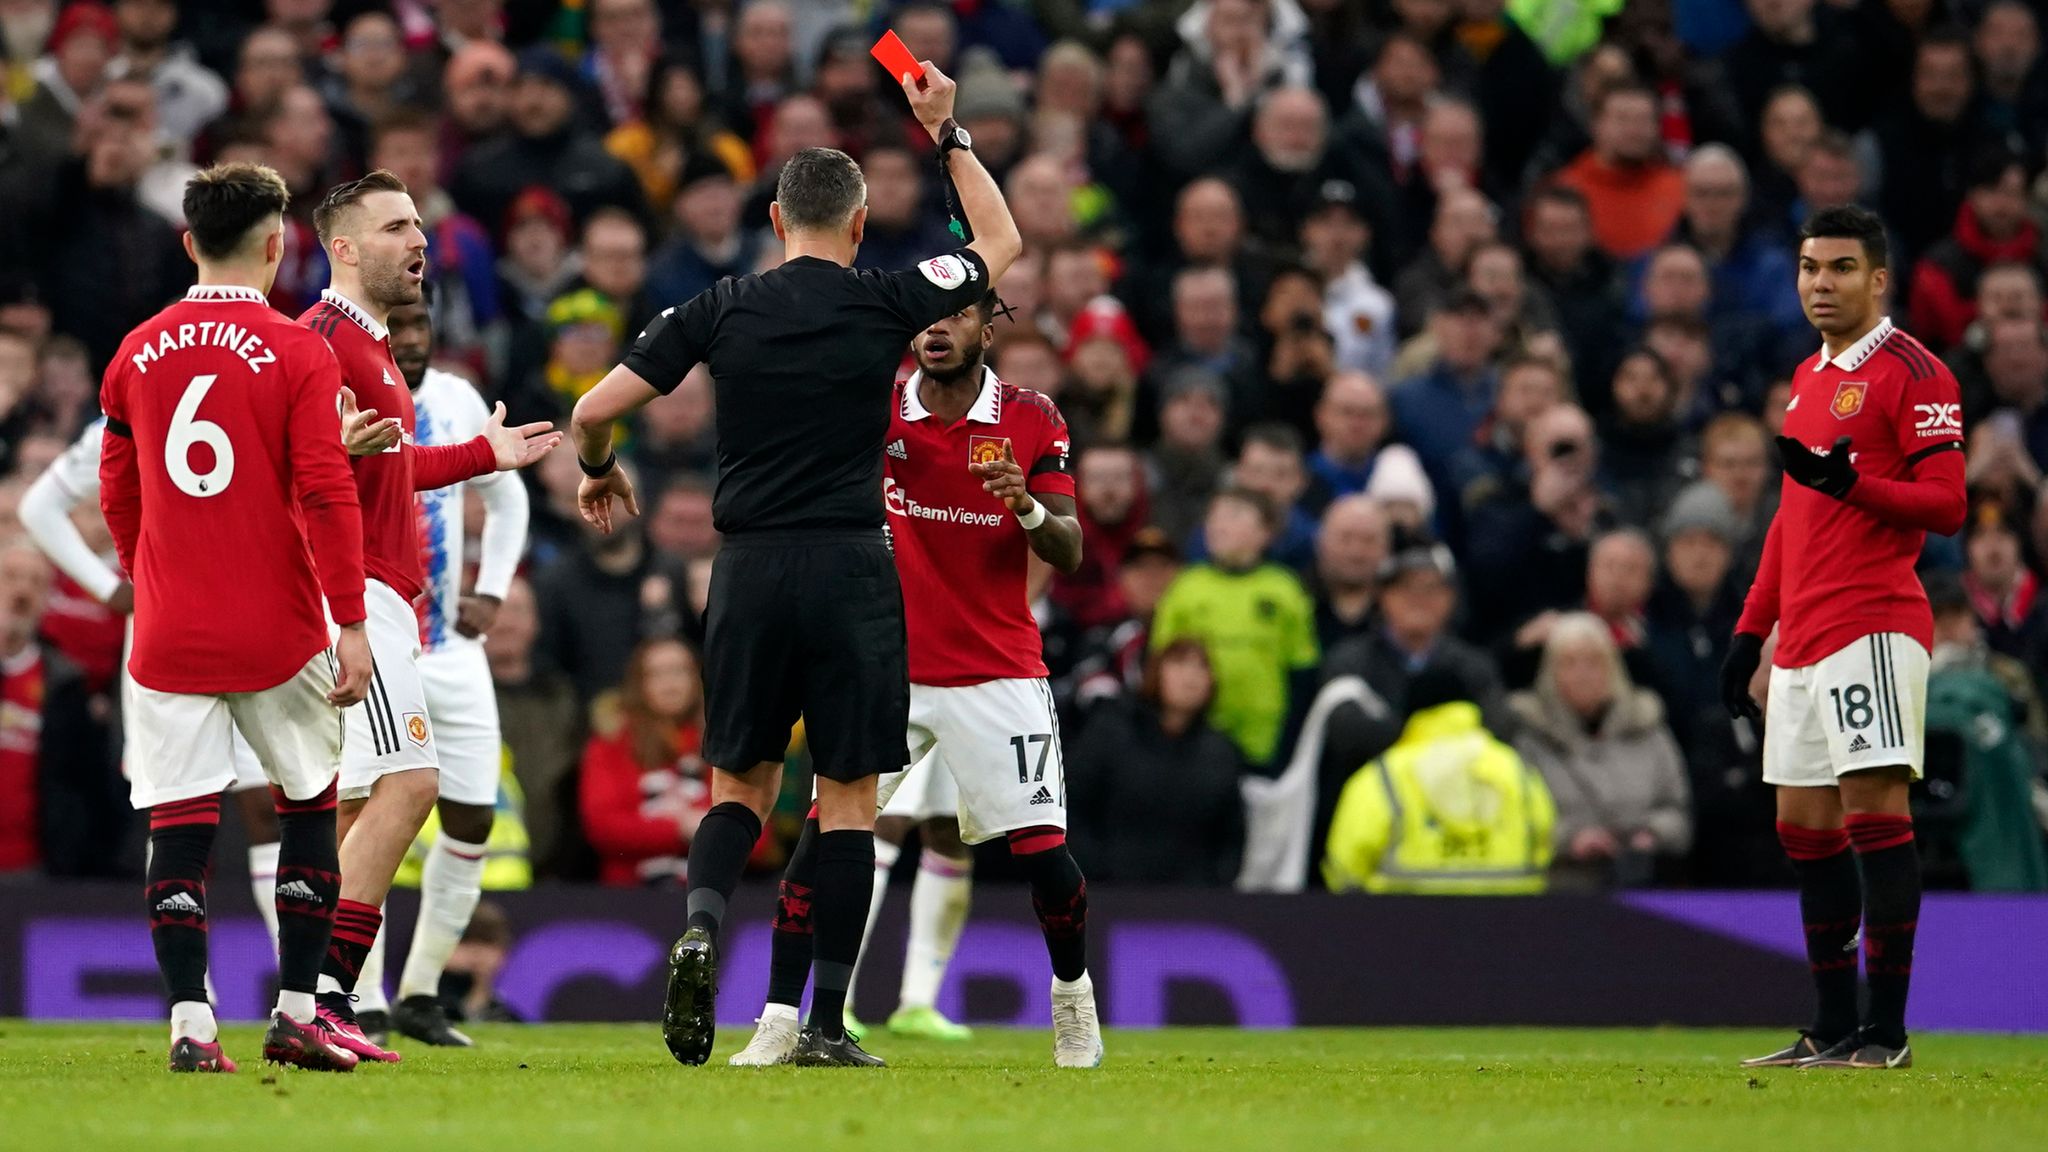 Manchester United's Casemiro being shown a red card during their EPL GW 22 clash with Crystal palace